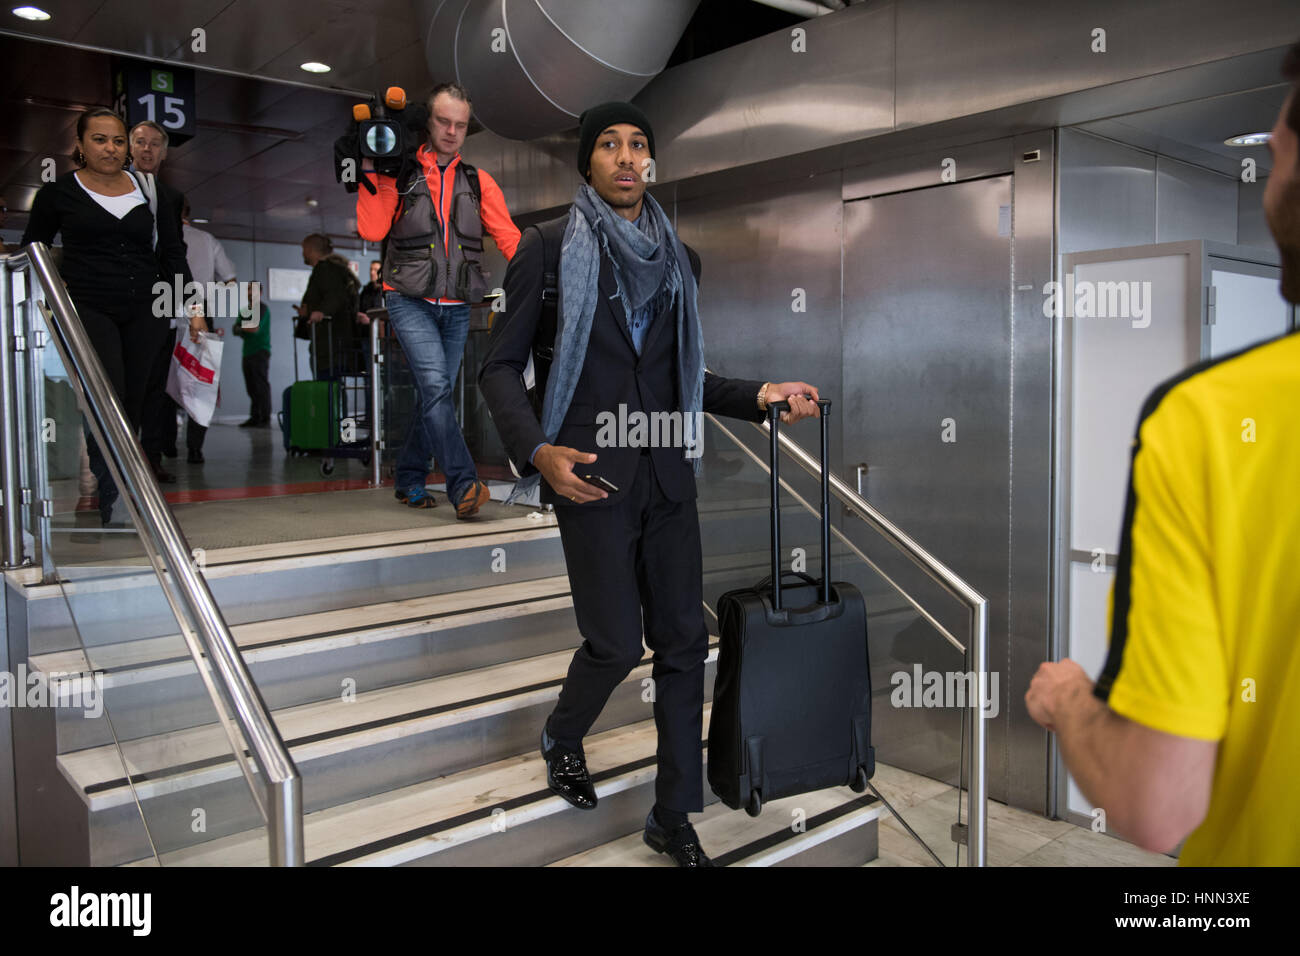 Lisbon, Portugal. 15th Feb, 2017. Borussia Dortmund player Pierre-Emerick Aubameyang waits for the return flight at the airport in Lisbon, Portugal, 15 February 2017. BVB were defeated in the round of 16 soccer Champions Legaue match by S.L. Benfica. Photo: Bernd Thissen/dpa/Alamy Live News Stock Photo